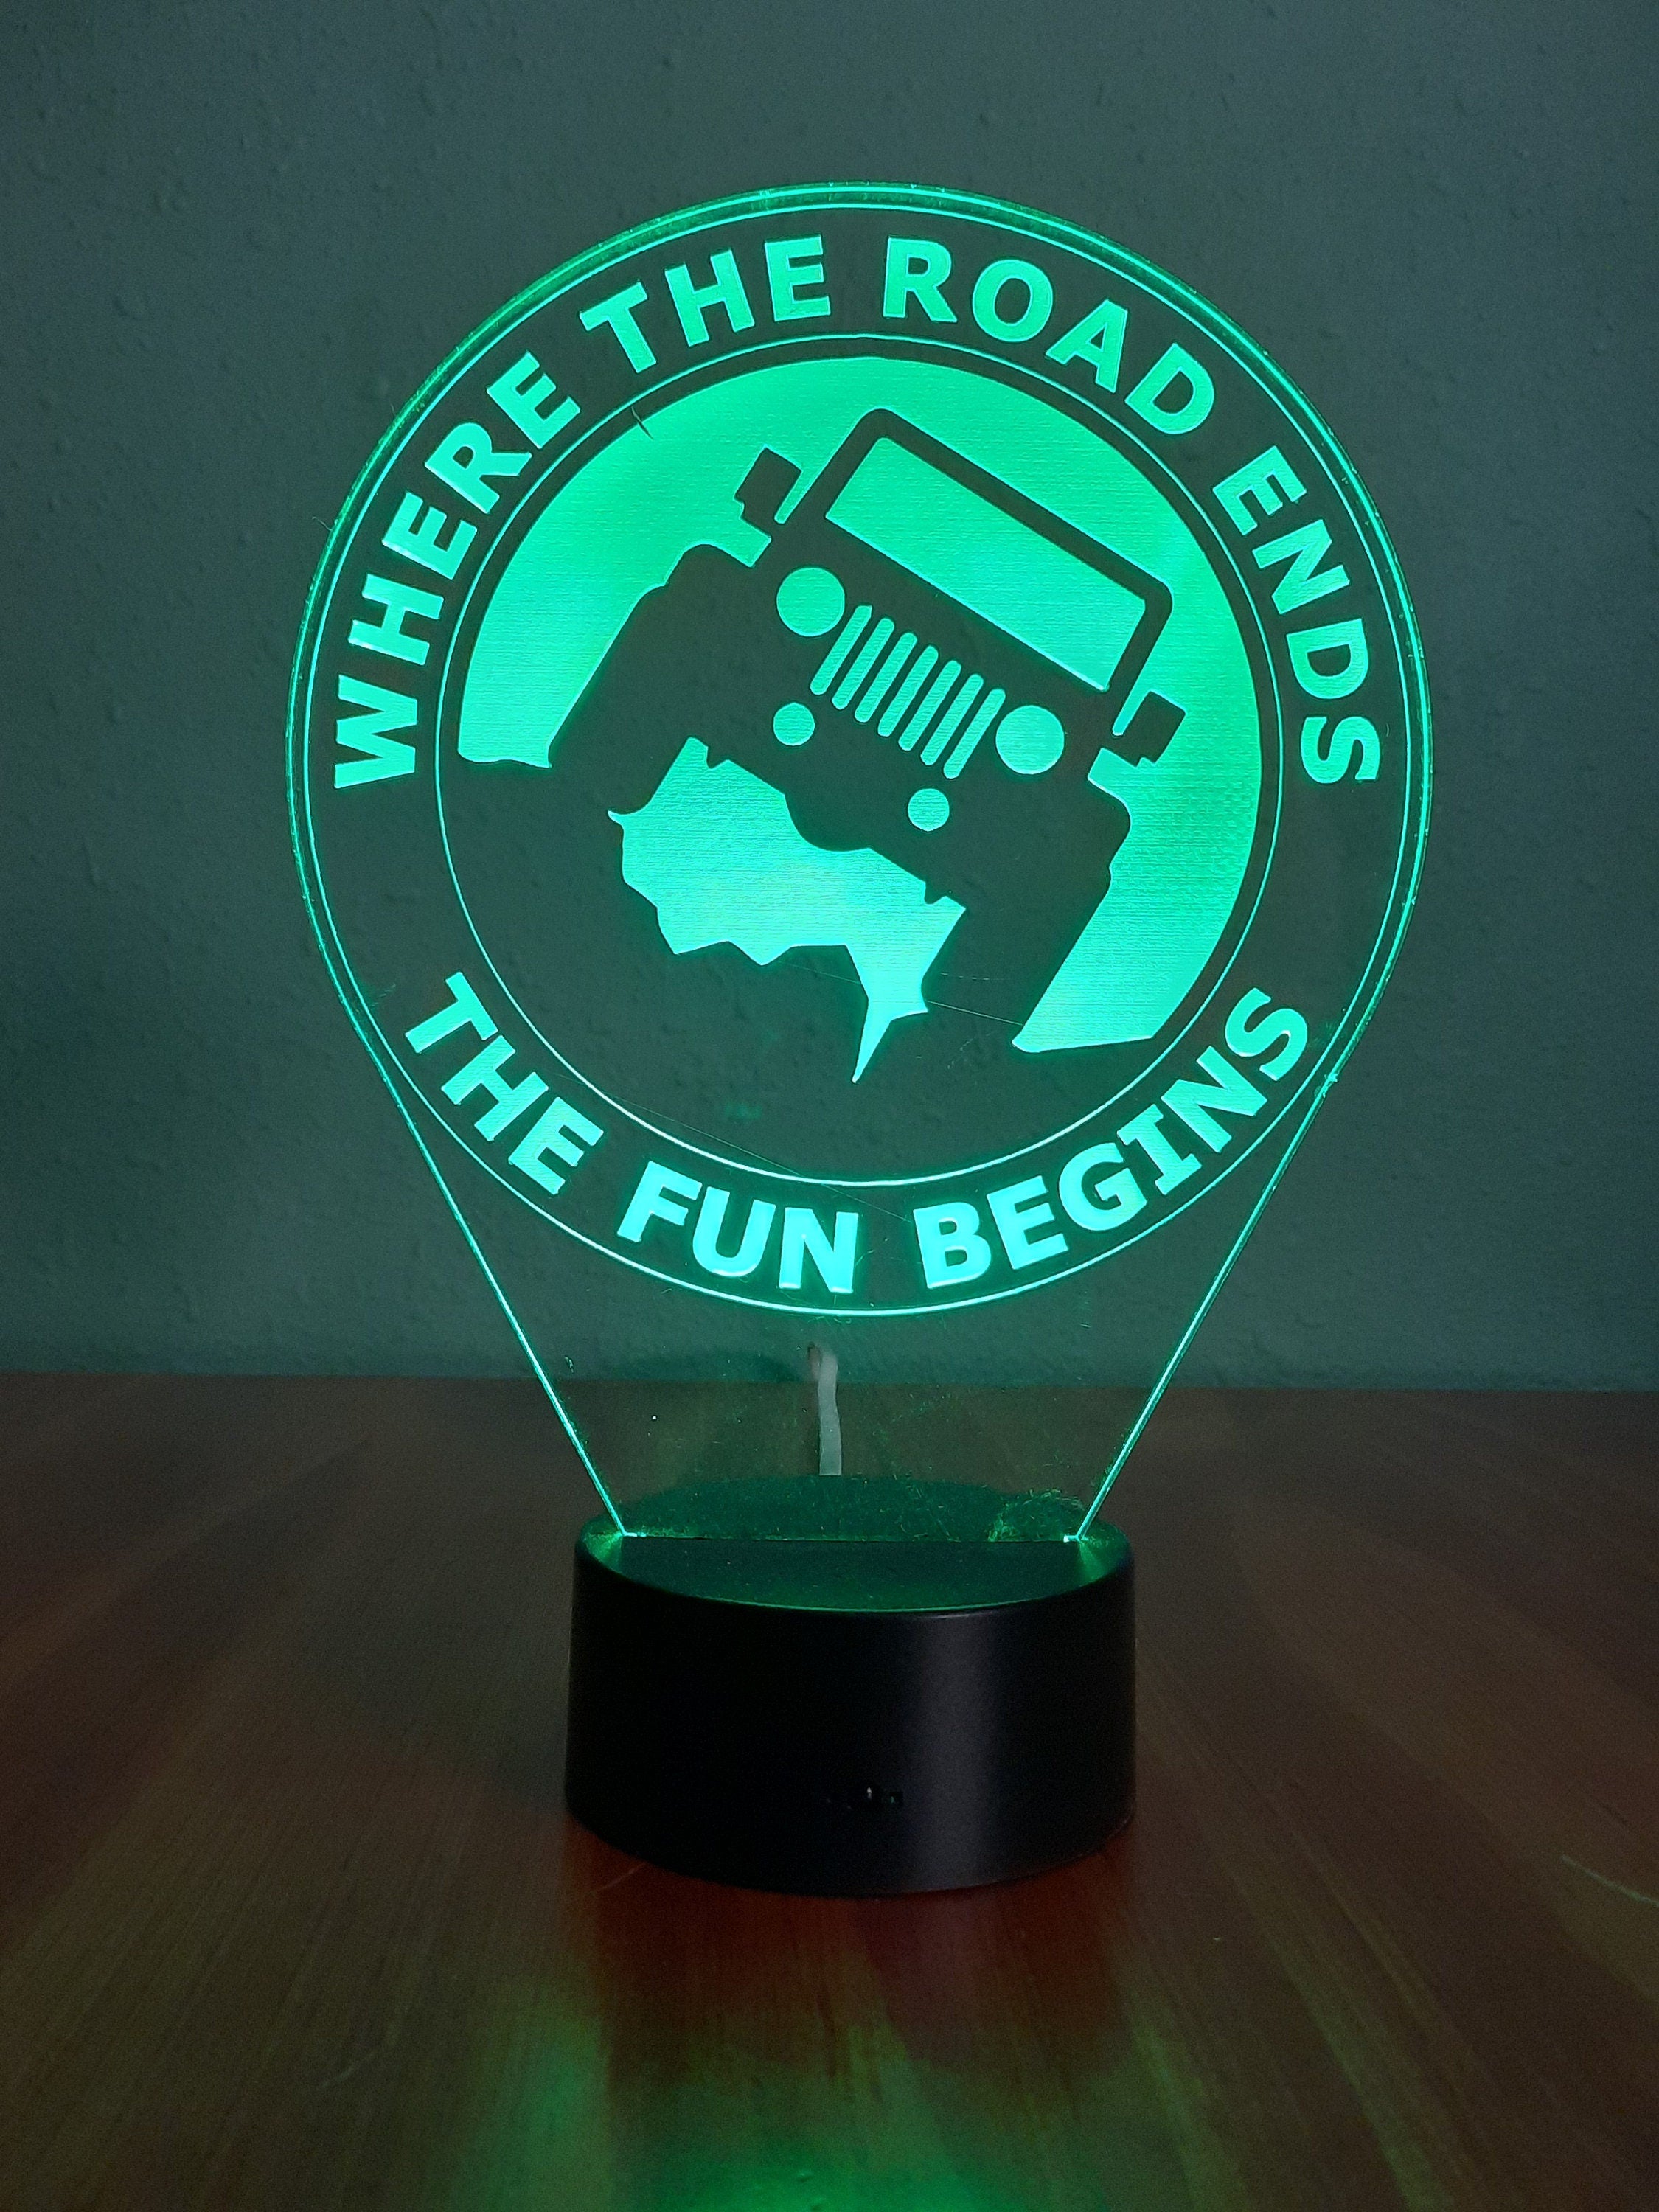 Awesome "Where the Road Ends The Fun Begins" LED lamp (1270) - FREE SHIPPING!